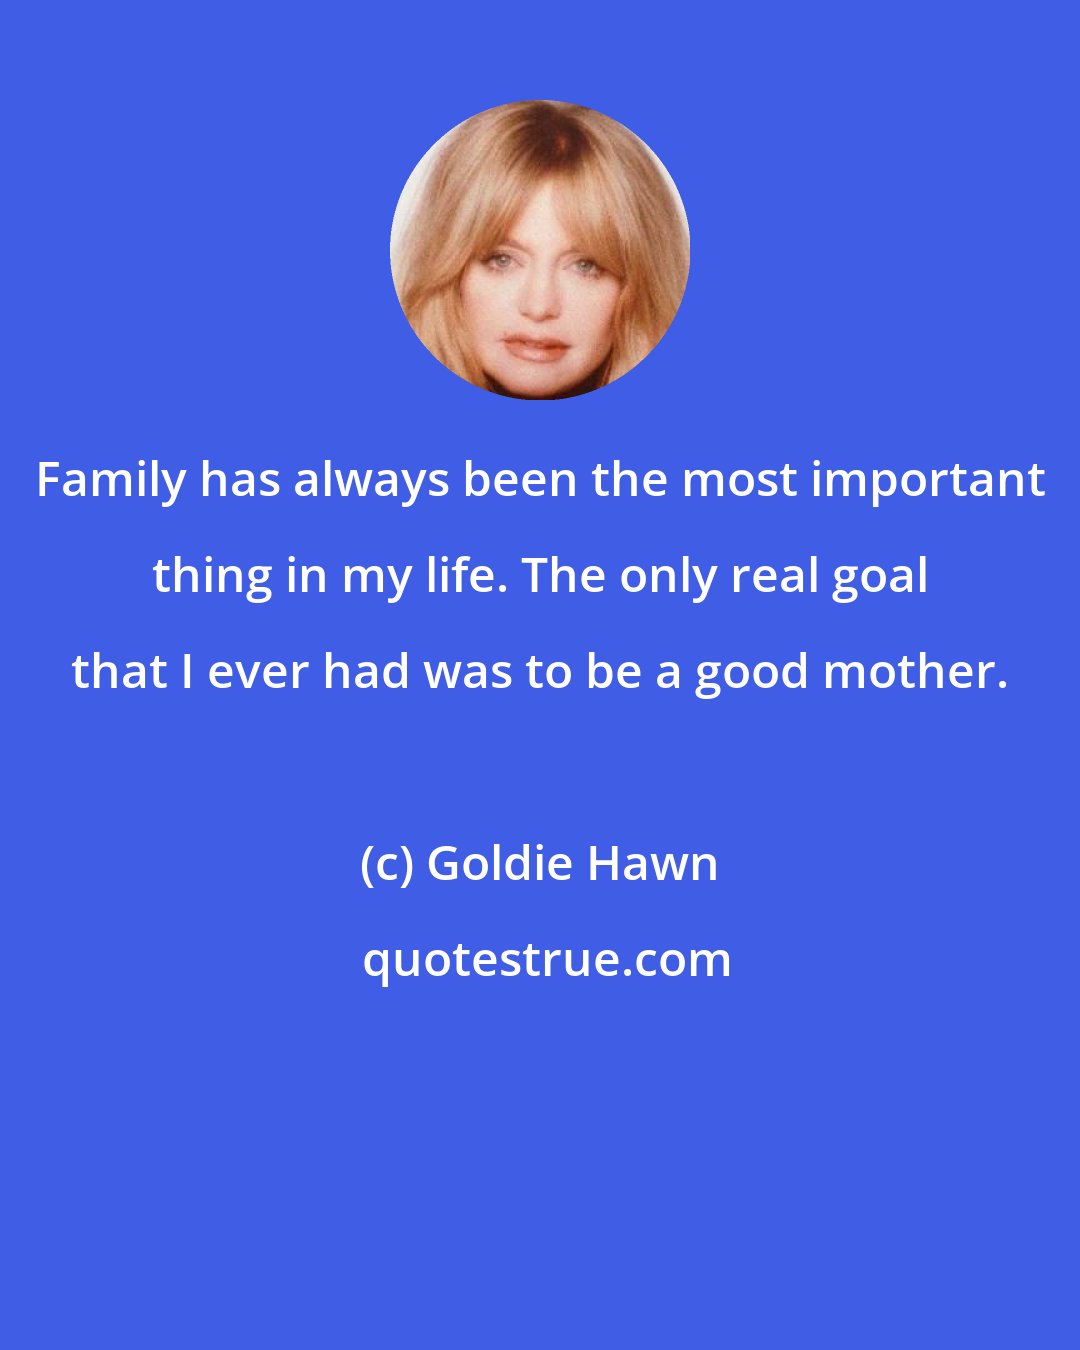 Goldie Hawn: Family has always been the most important thing in my life. The only real goal that I ever had was to be a good mother.